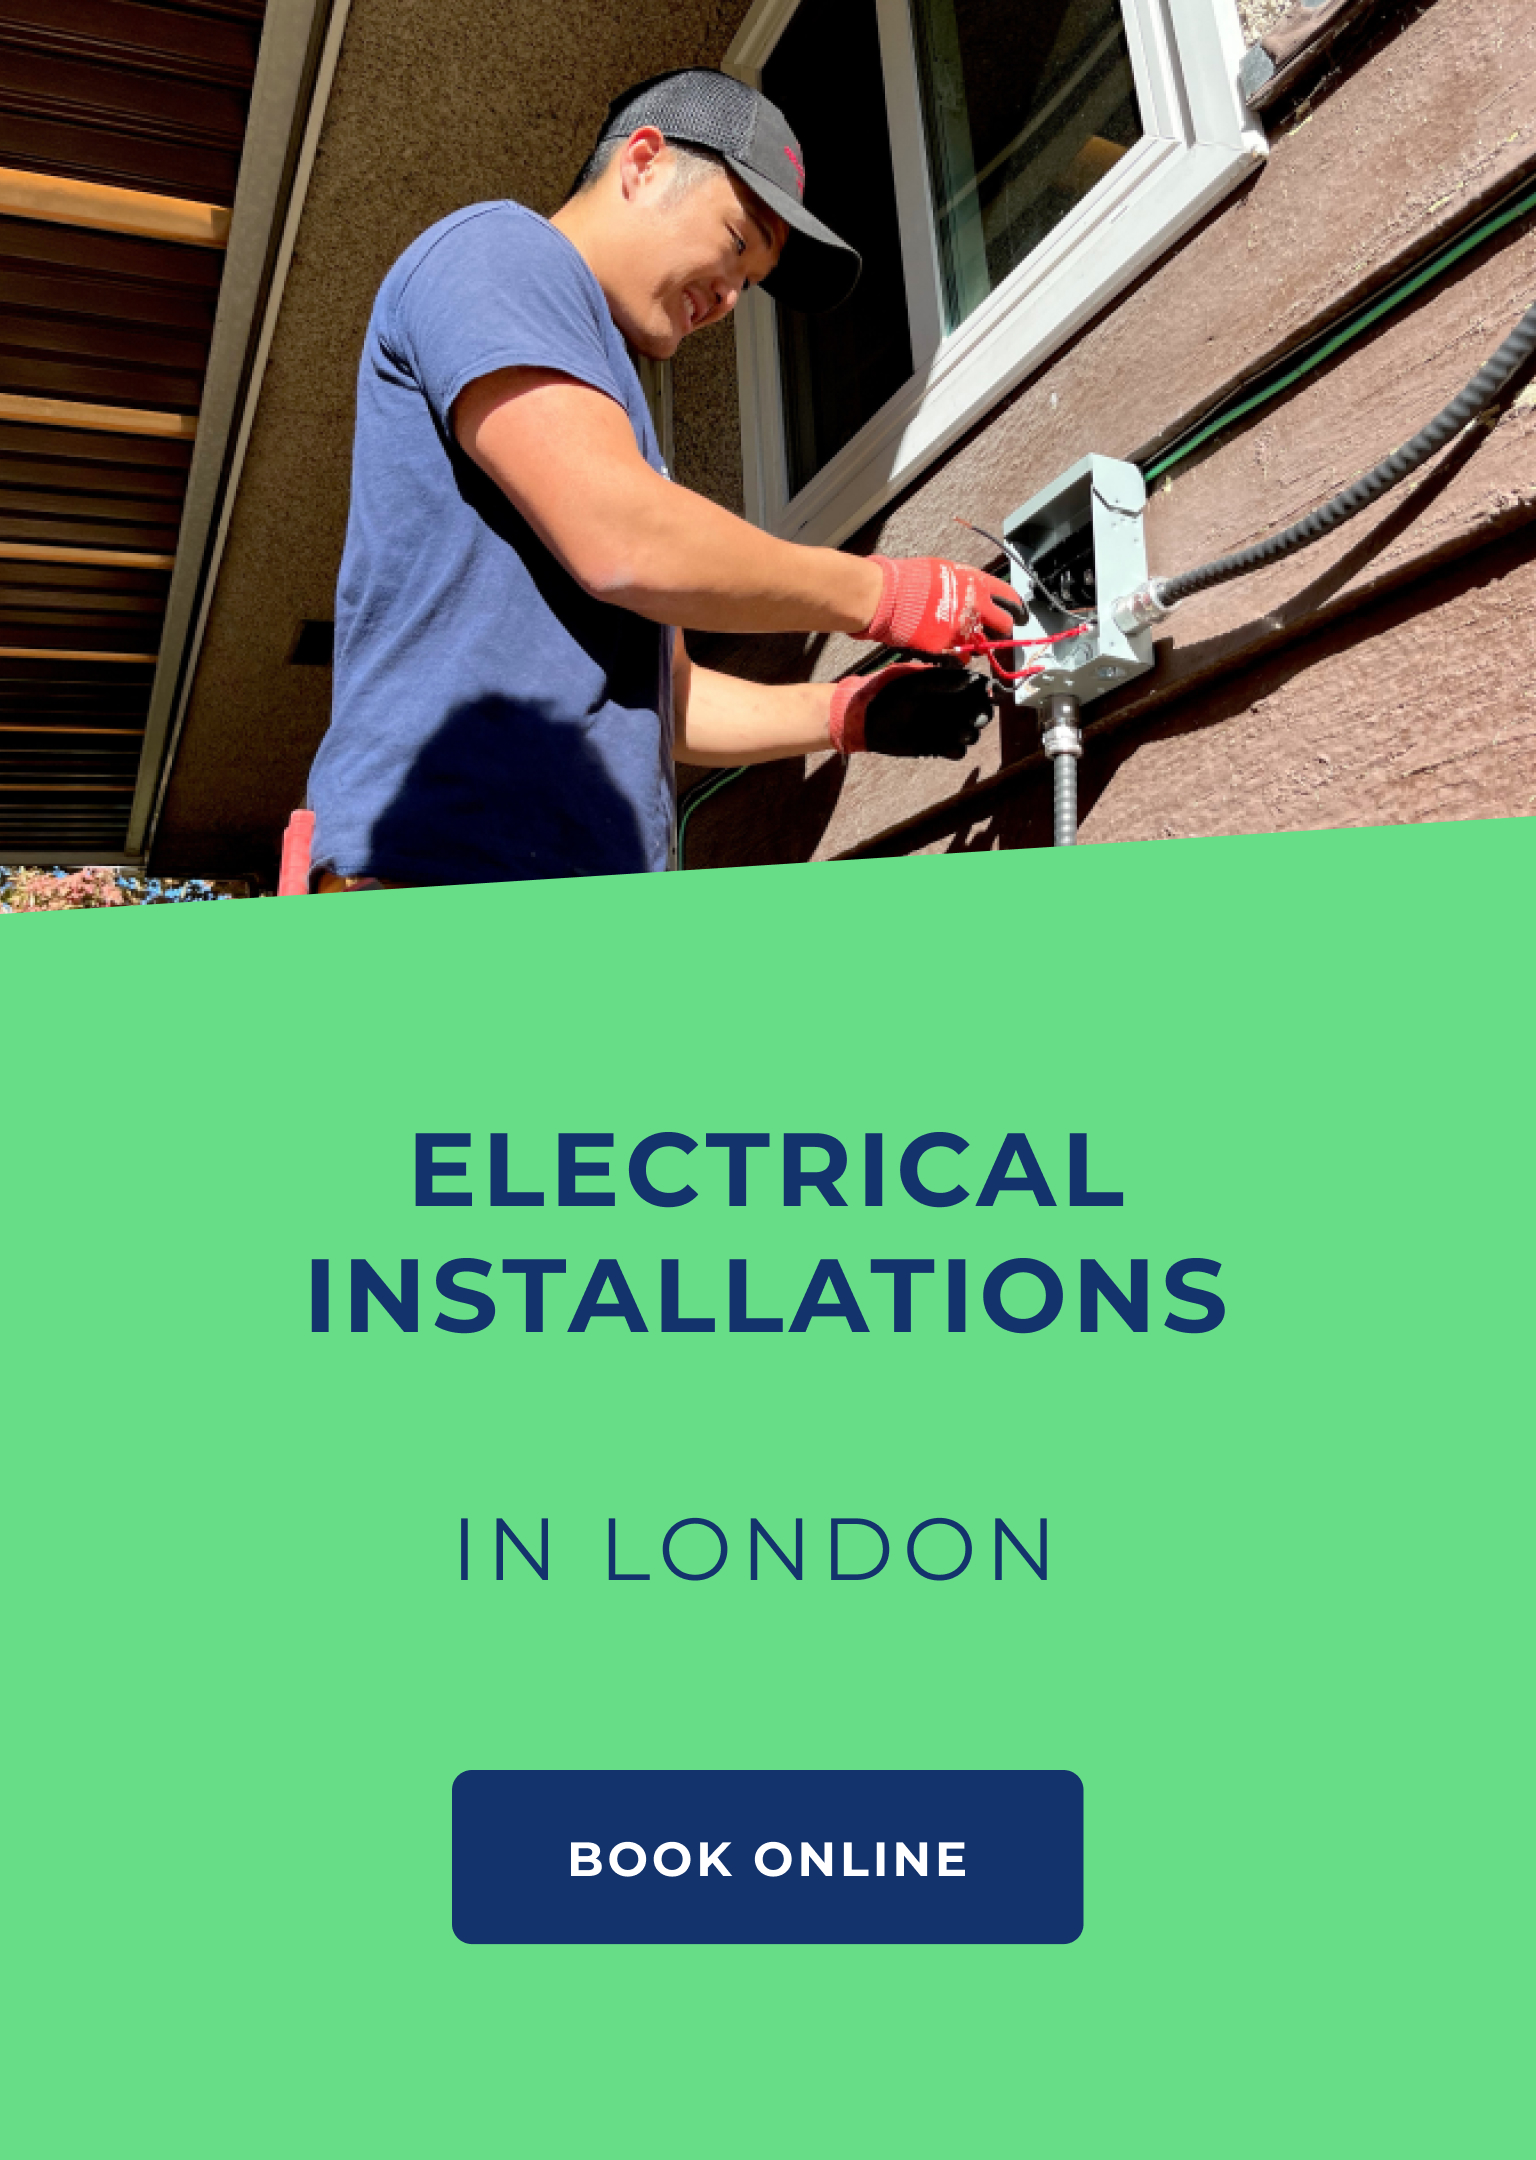 Electrical installation in London